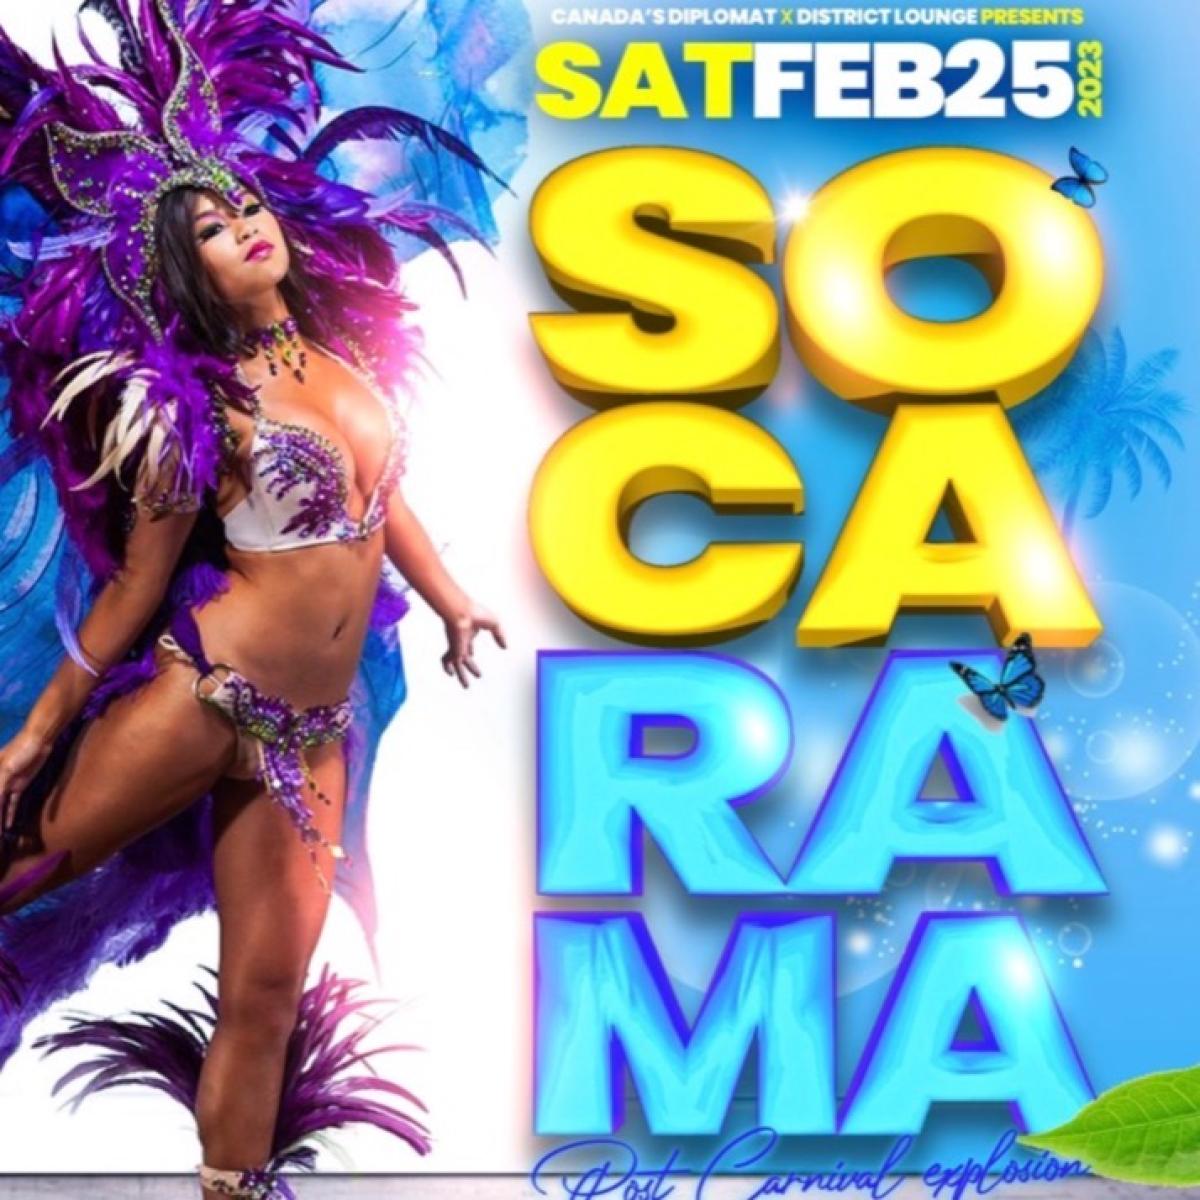 Socarama flyer or graphic.